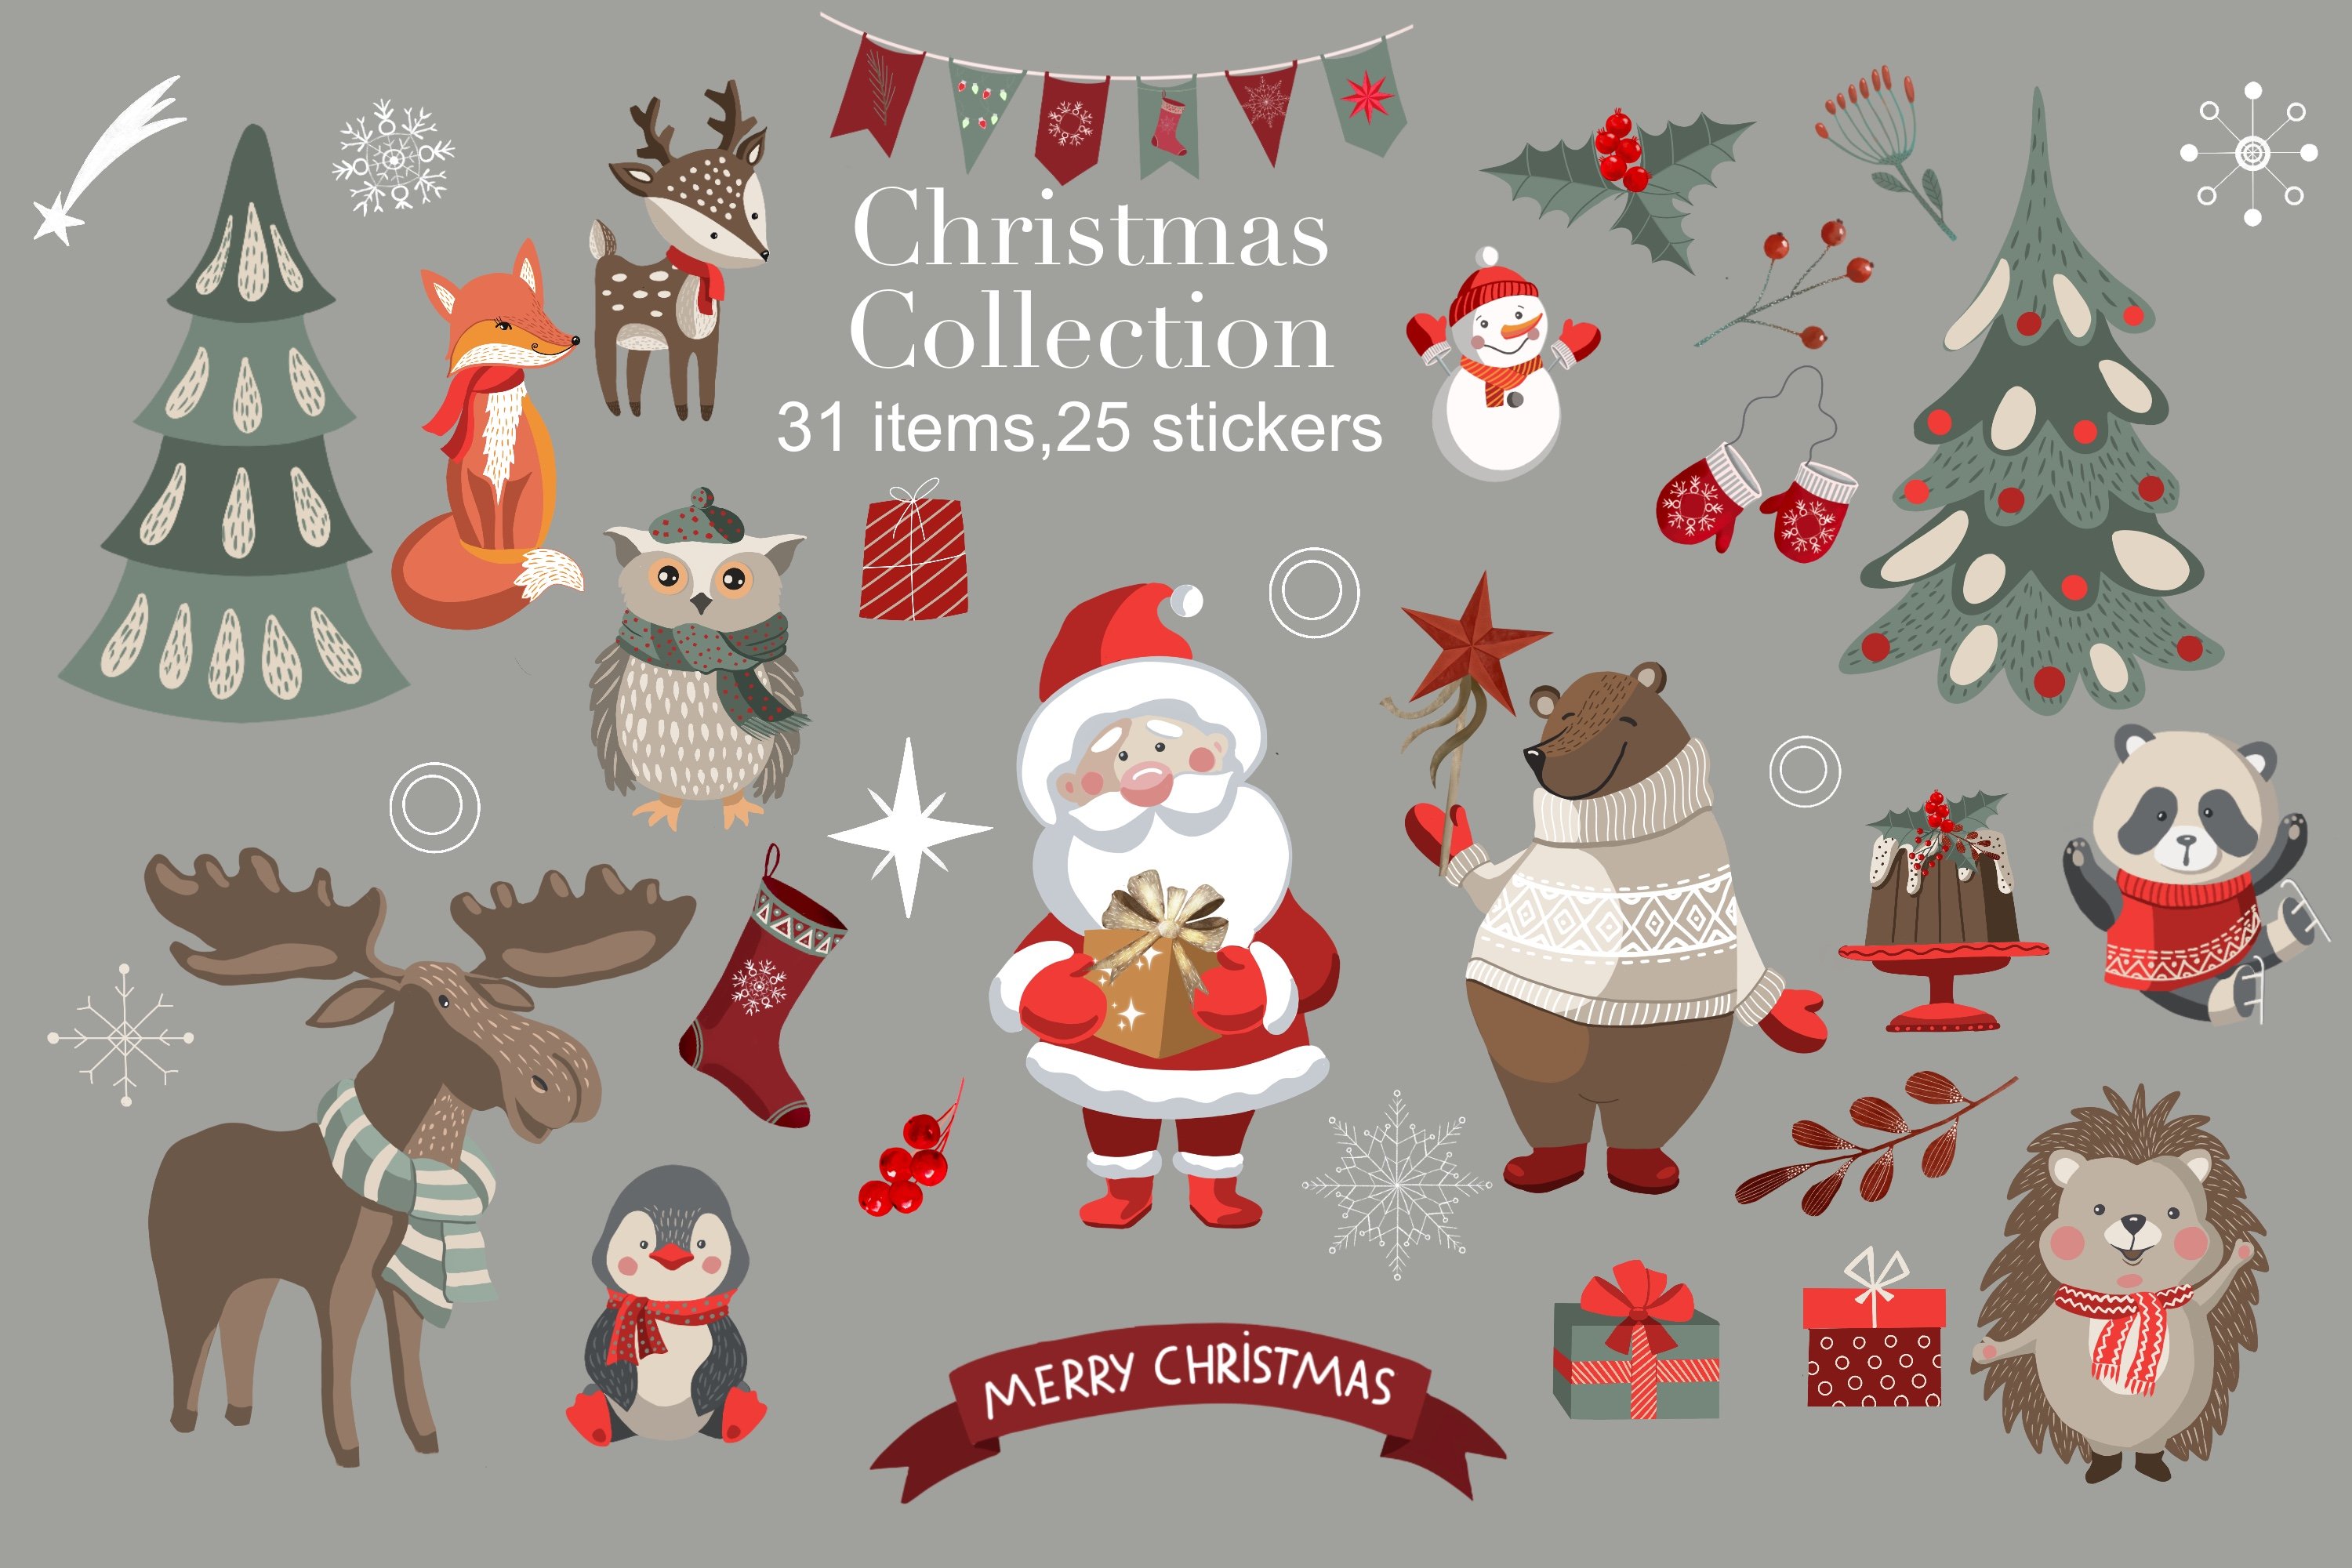 Christmas Collection of Decorative Stickers